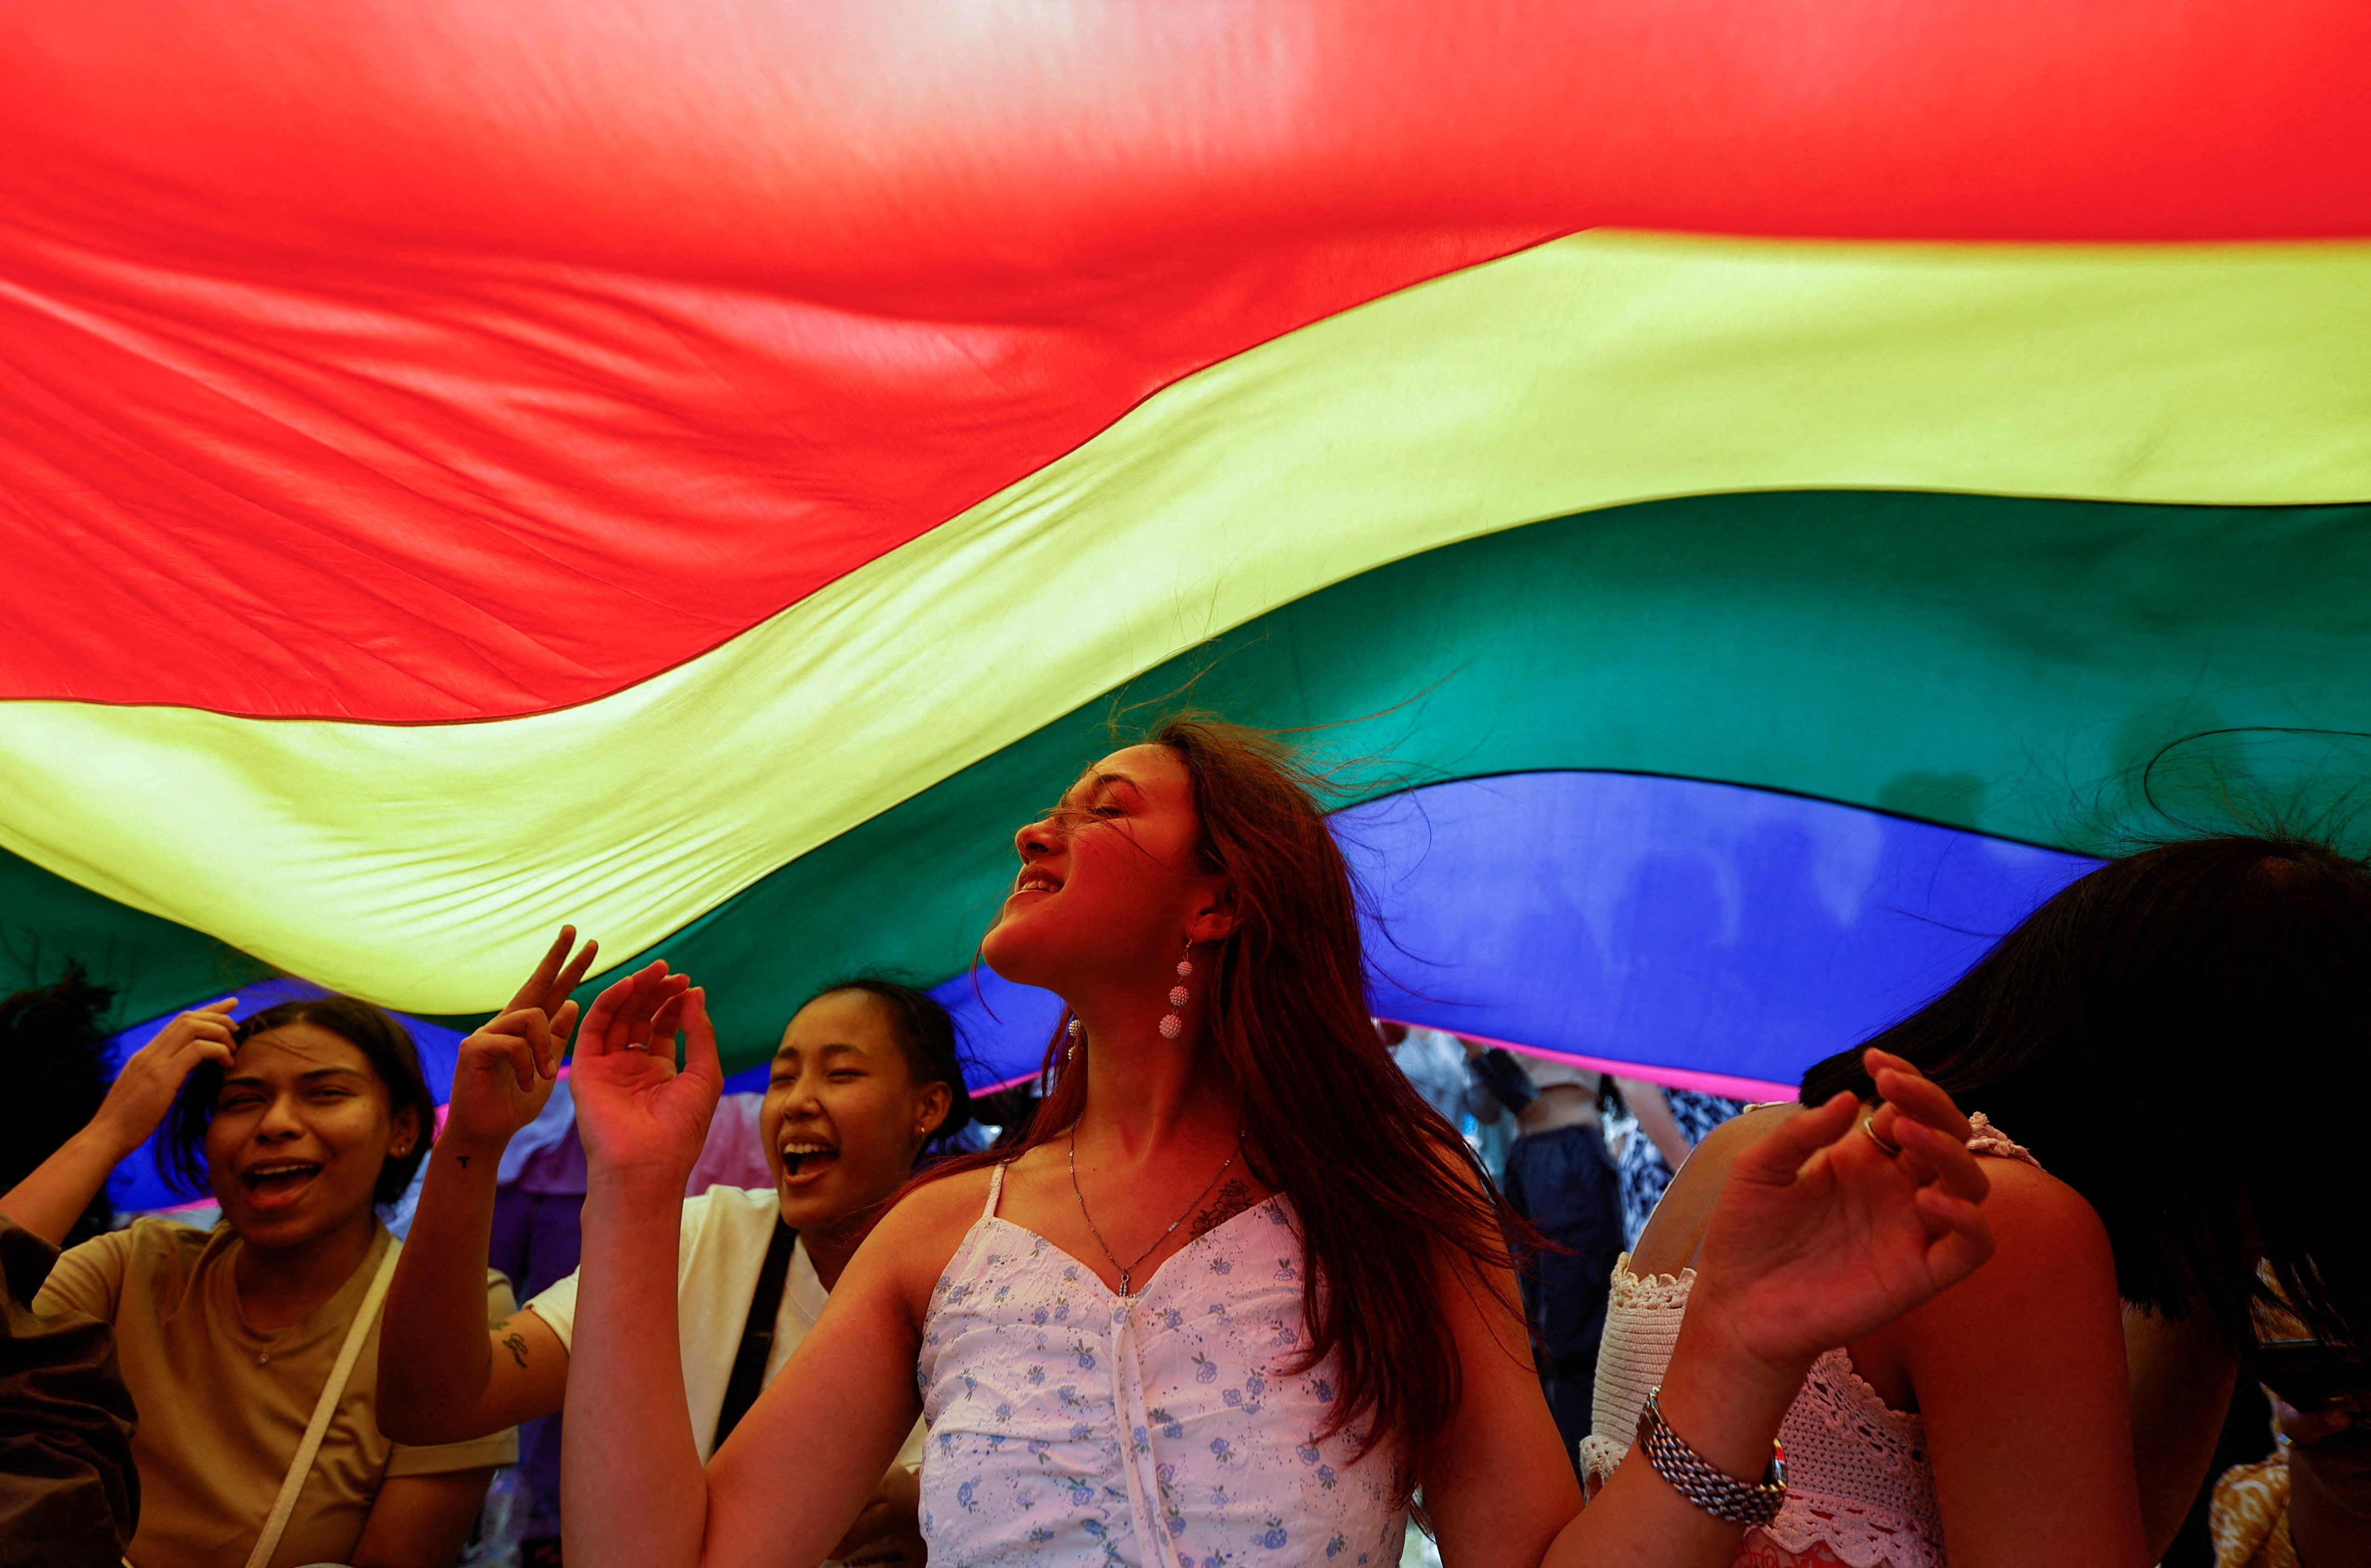 Nepali Little Girk Xxx Video - Nepal registers first same-sex marriage; 'historic', say activists | Reuters